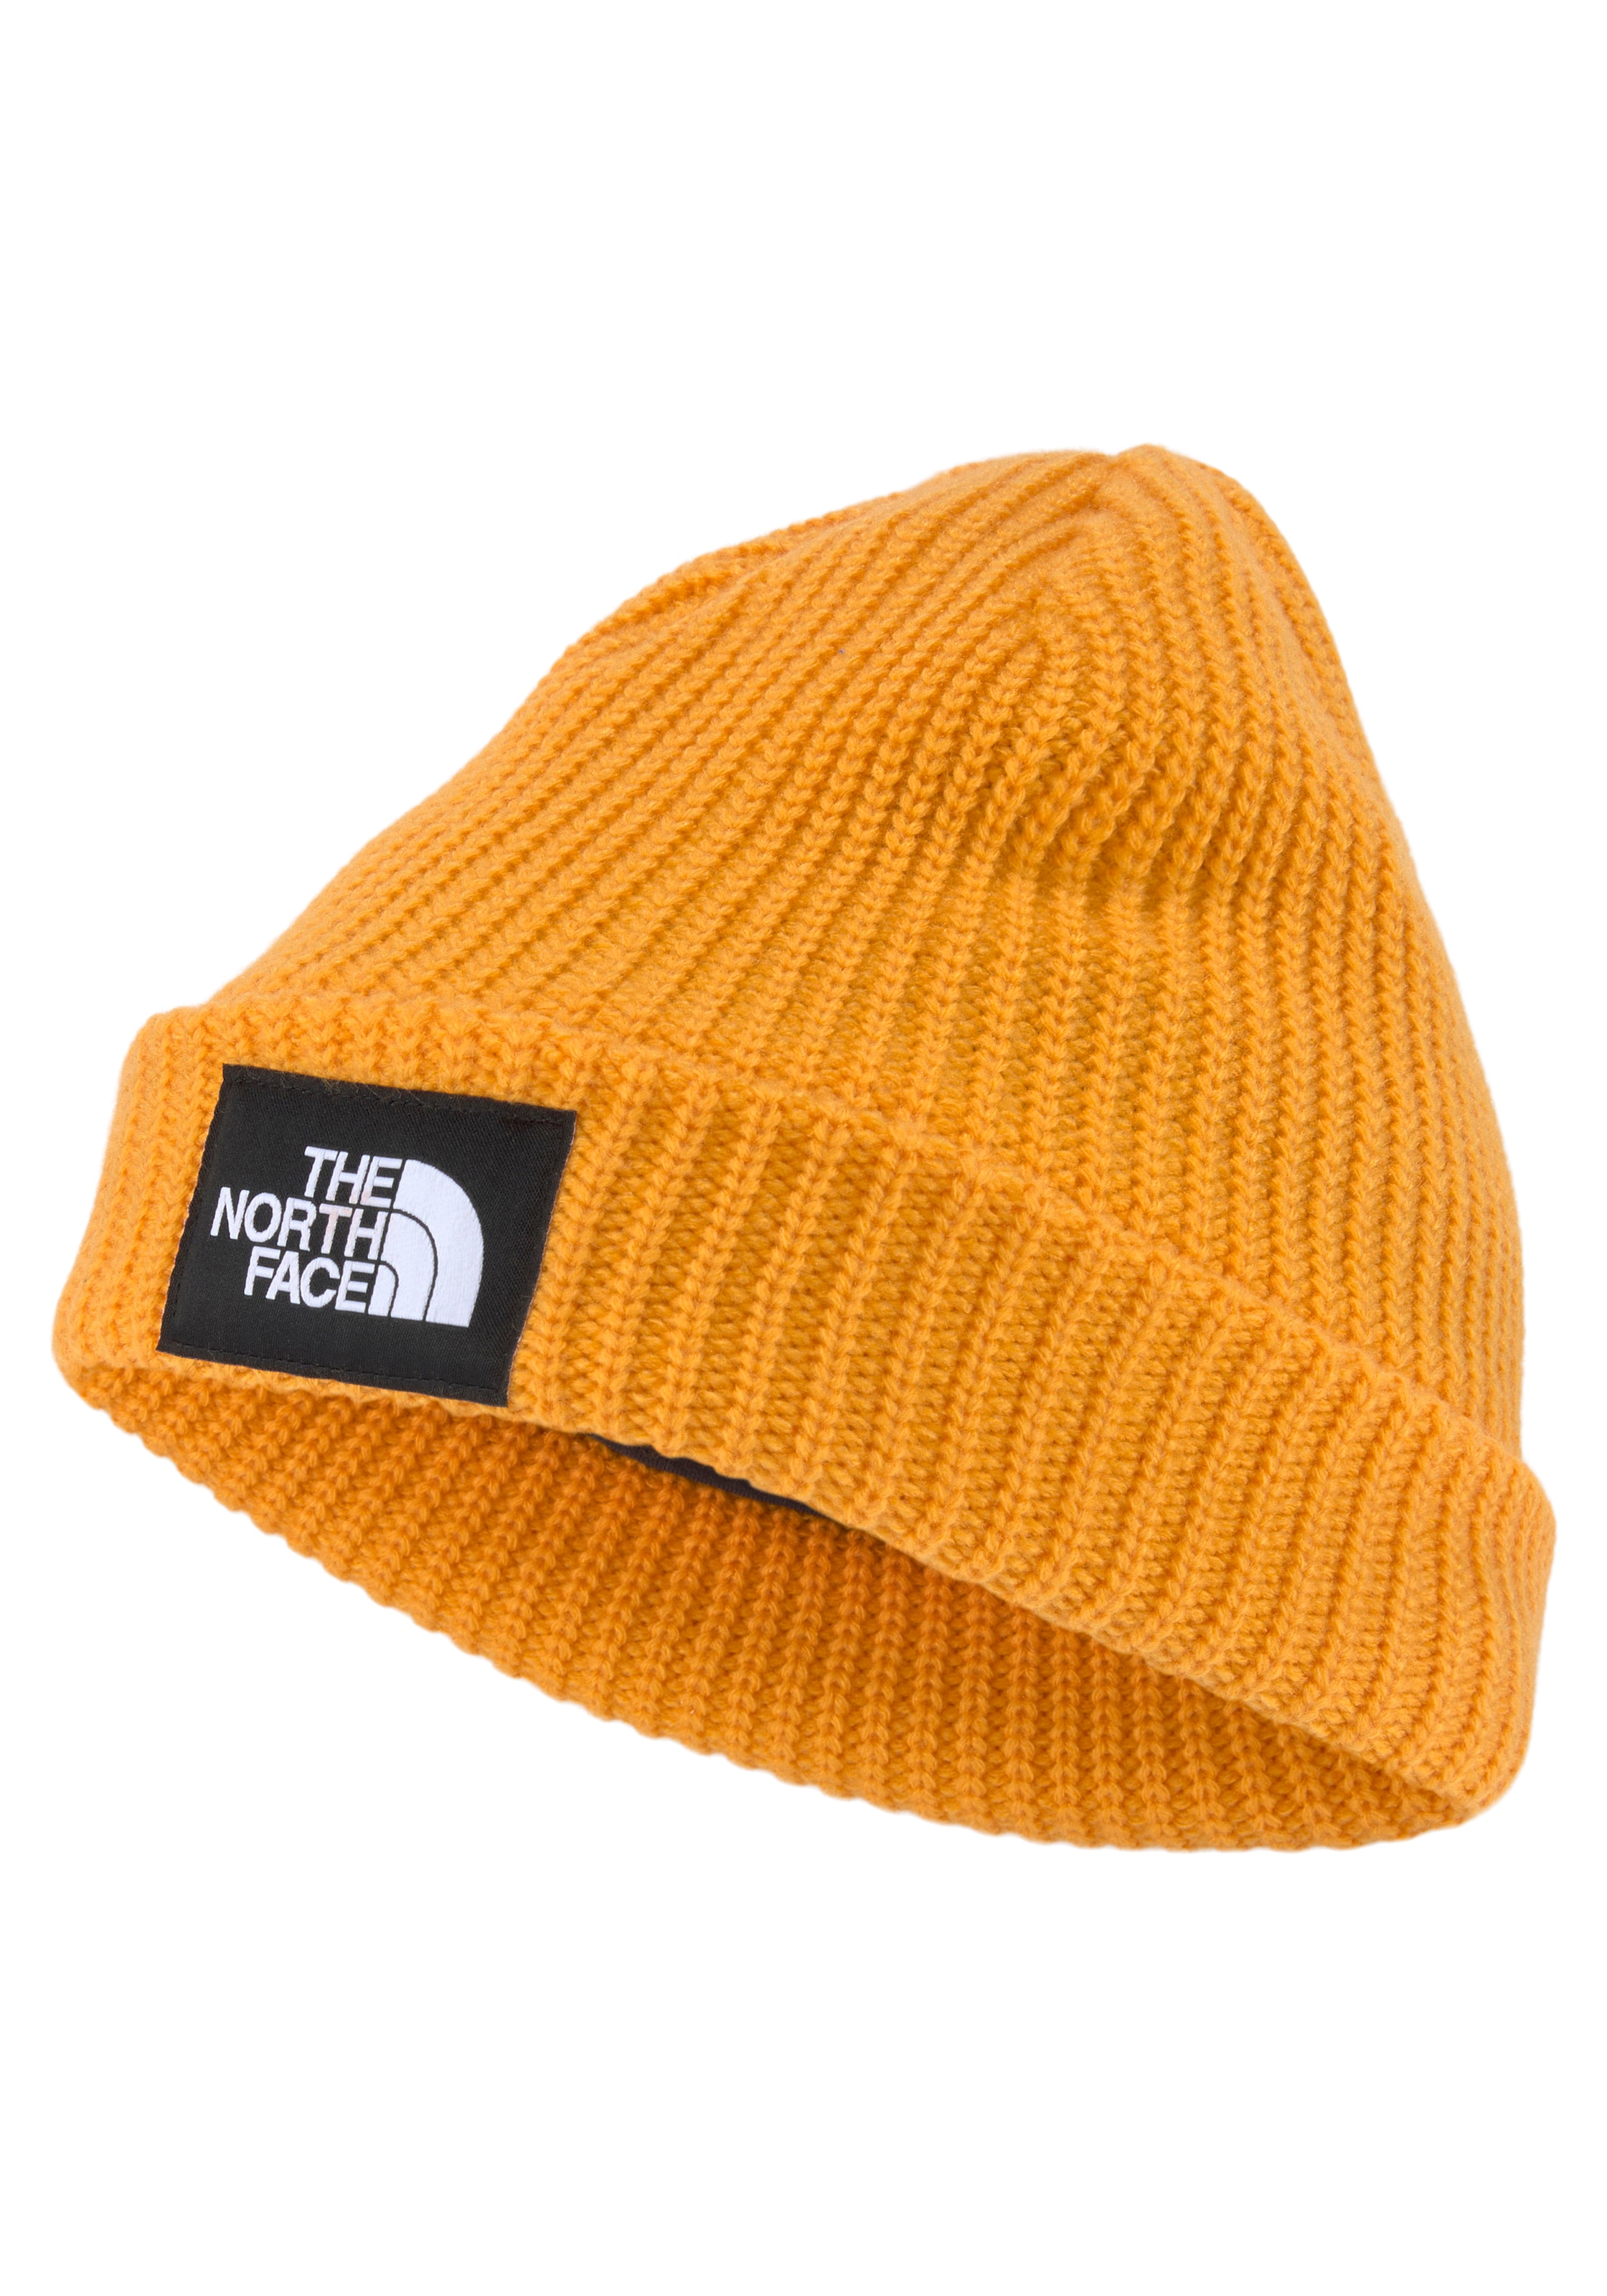 The North kaufen Beanie Face BEANIE«, »SALTY DOG | UNIVERSAL Logolabel mit LINED